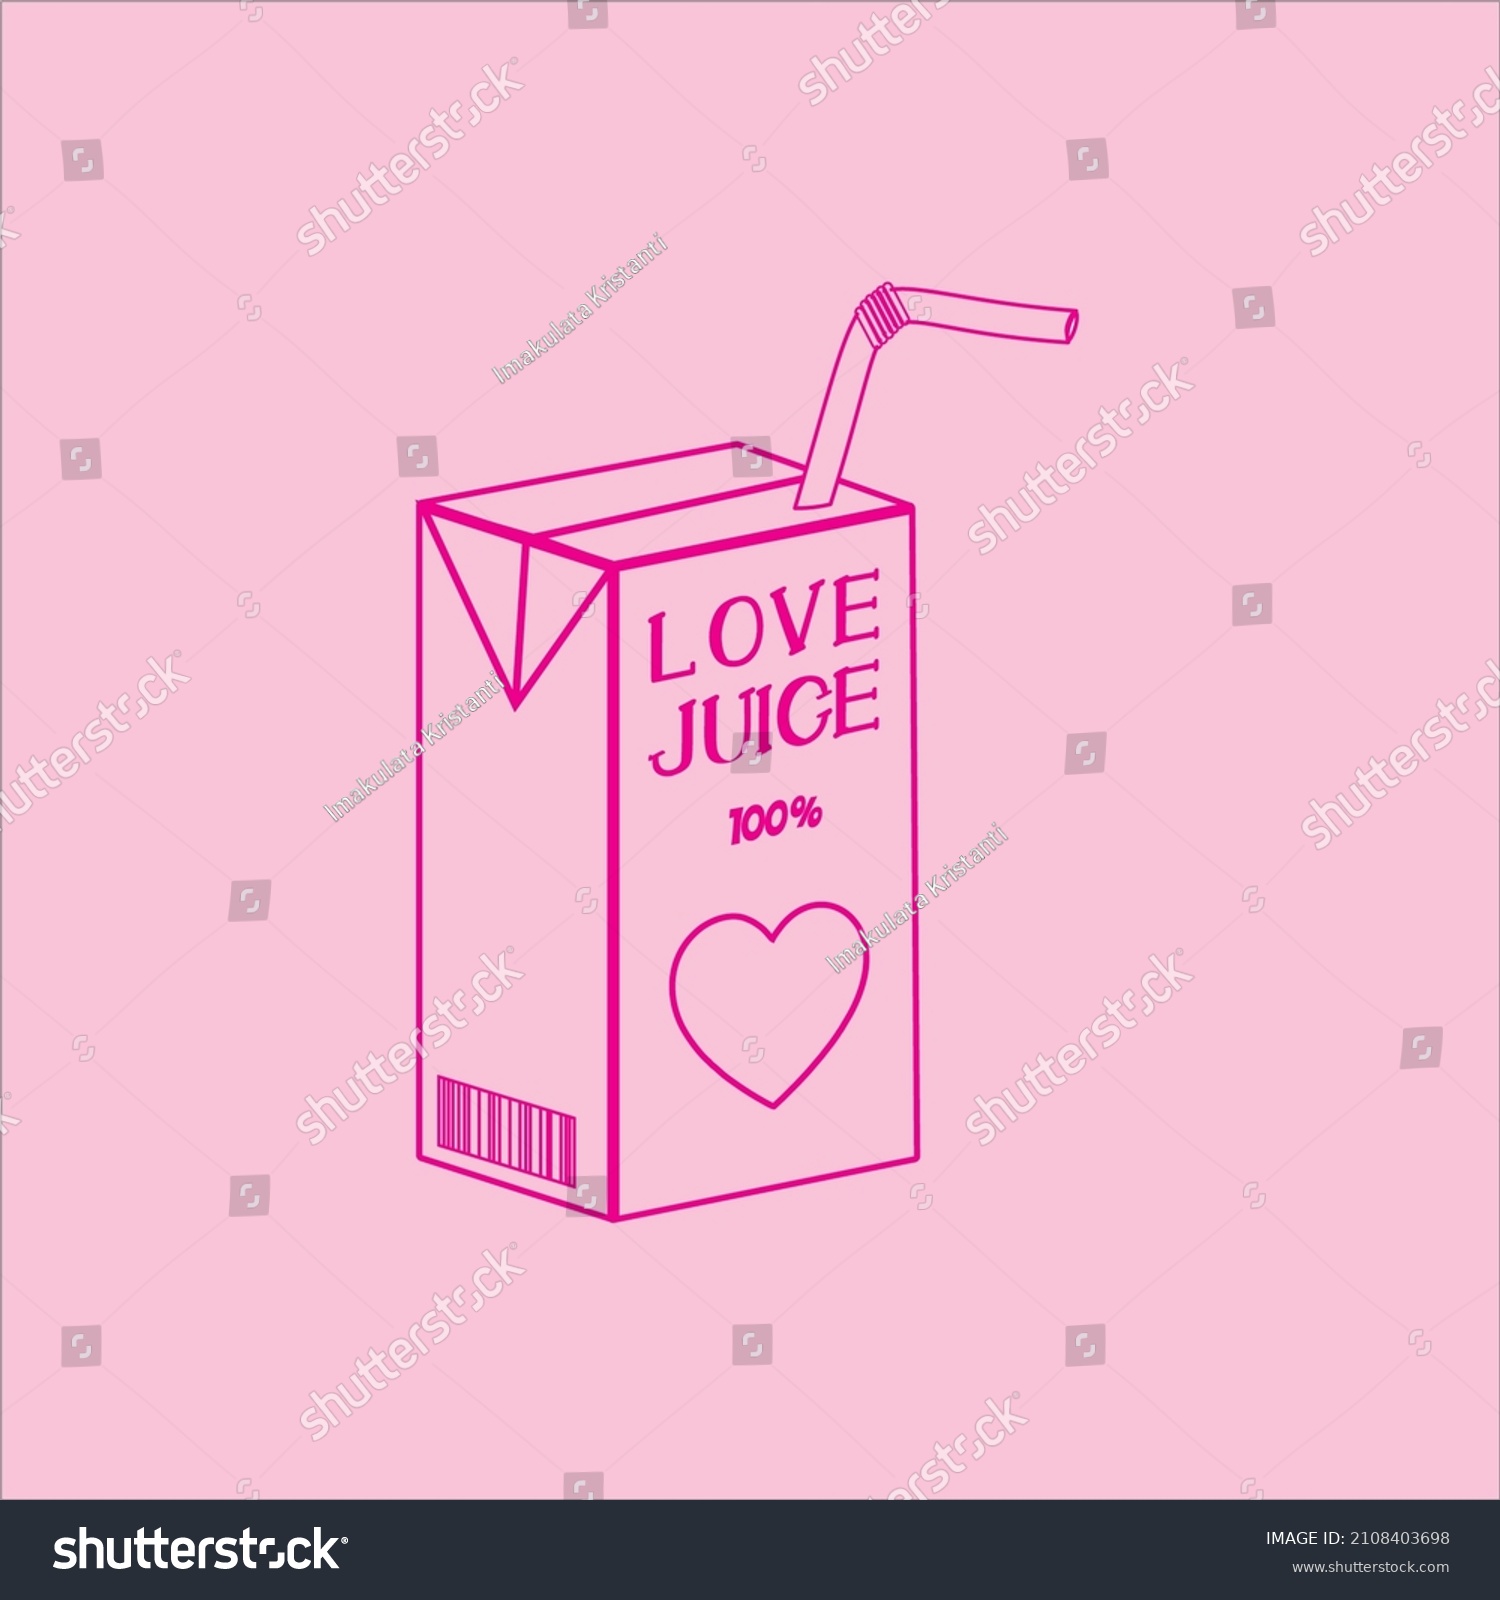 SVG of Cute love juice box design, creative line art illustration for love and valentine day themed vector illustration svg